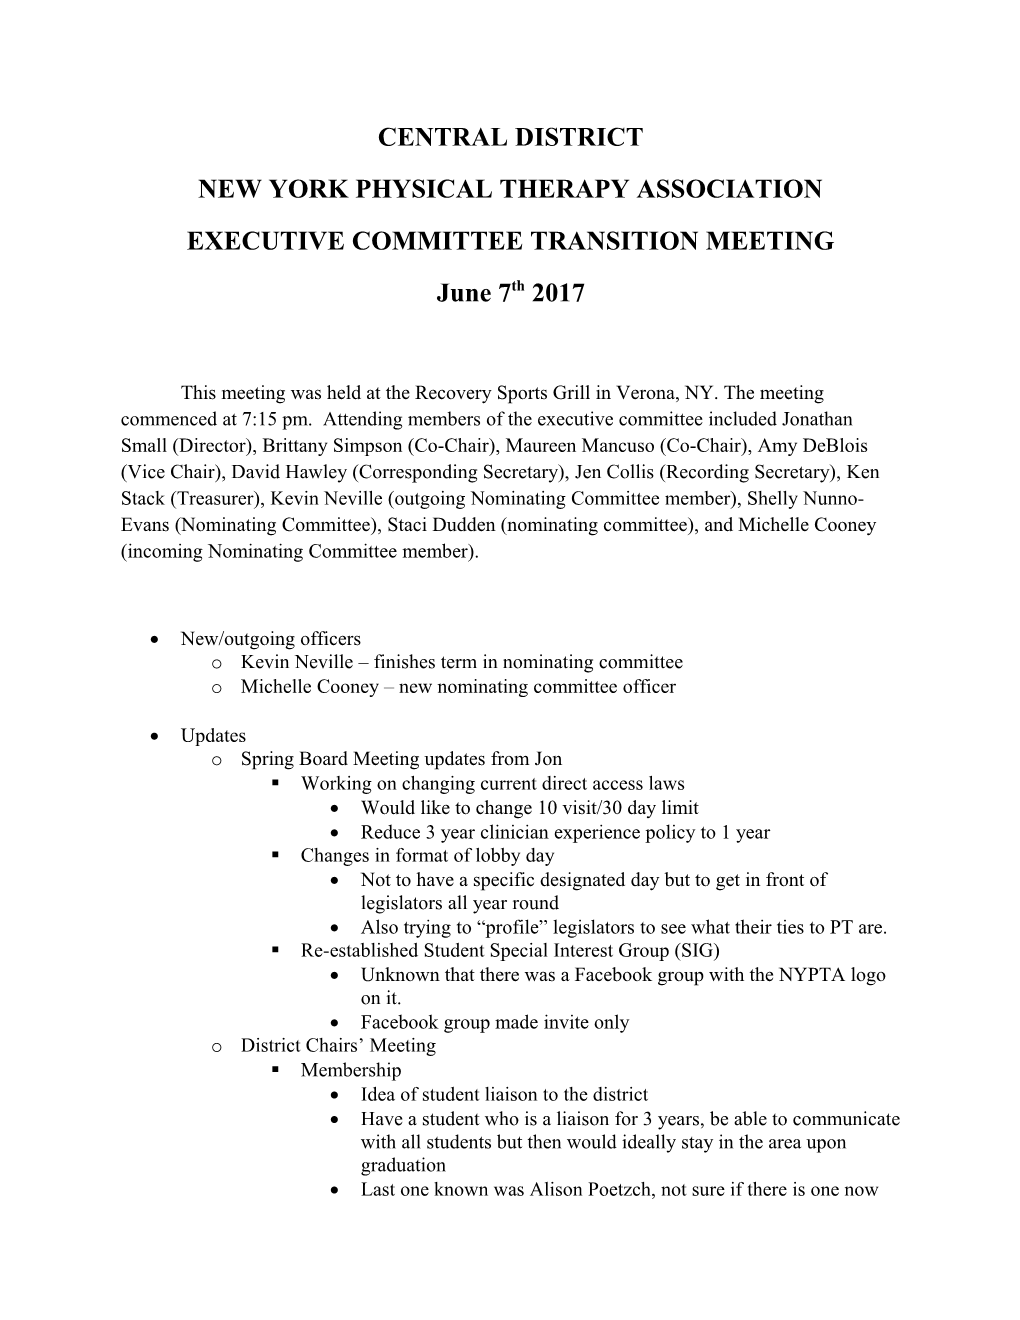 New York Physical Therapy Association